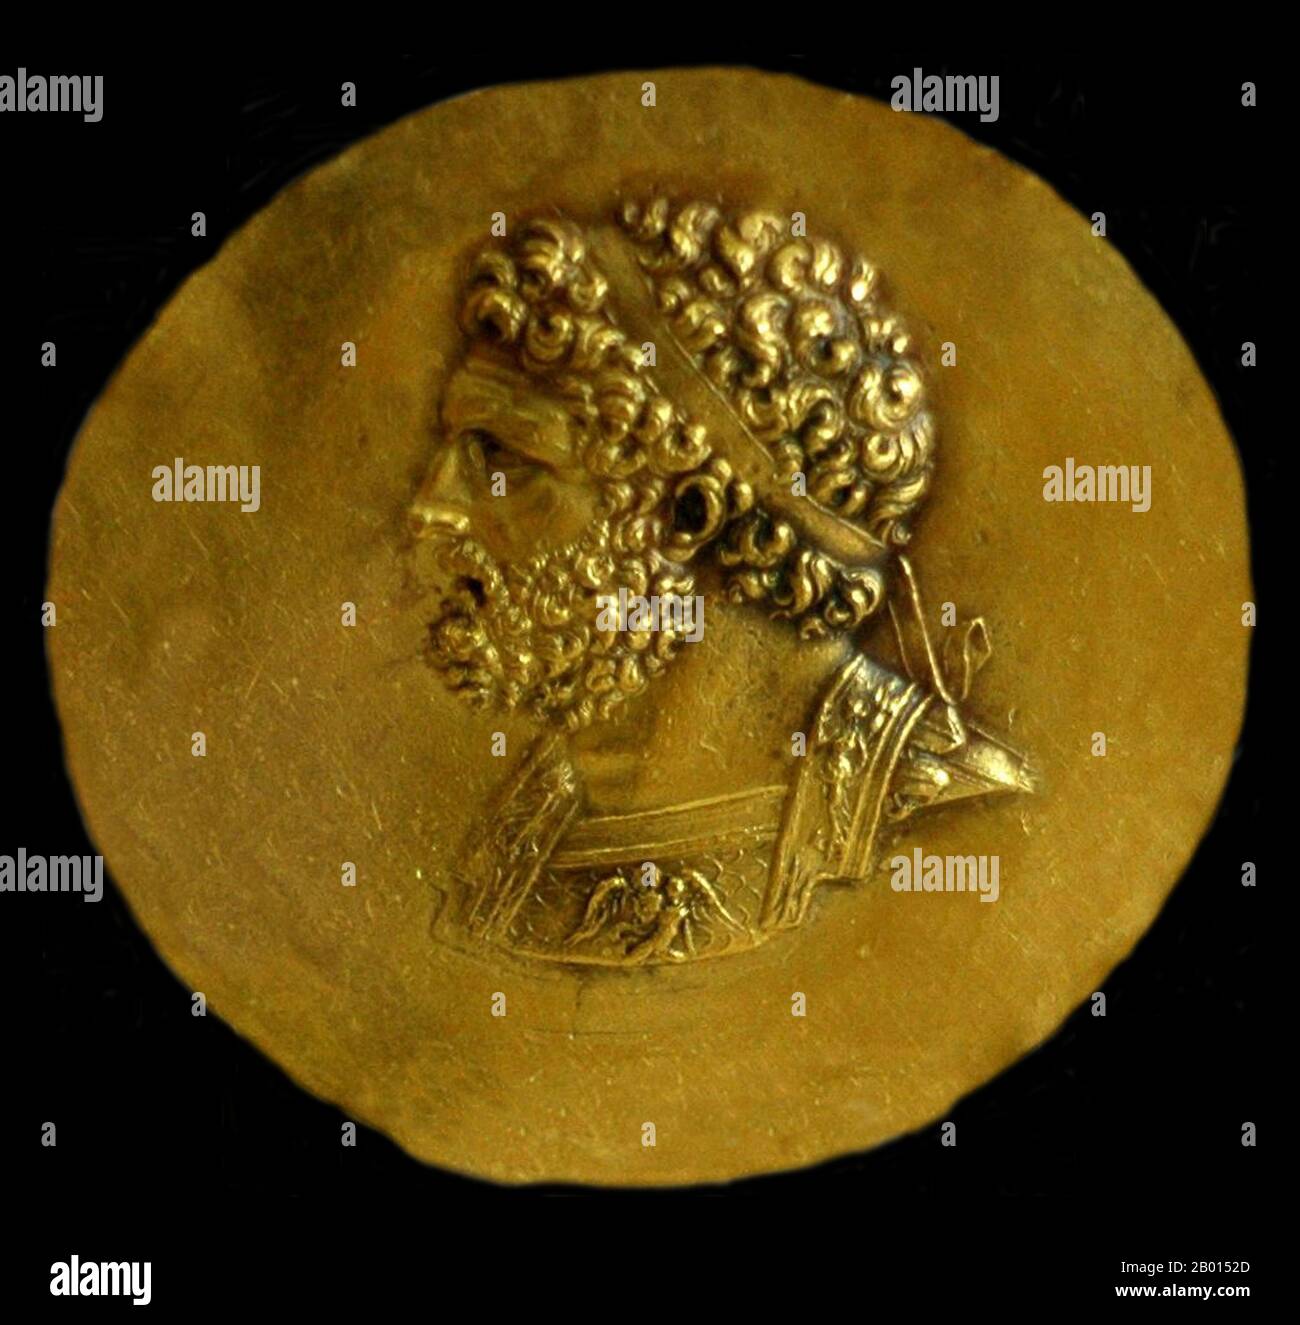 Rome/Greece: Head of Philip II of Macedon (r.359-336 BCE), on a gold Niketerion (victory medallion), believed to have been minted in Tarsus during the reign of Emperor Alexander Severus, 3rd century CE.  Philip II of Macedon, (382-336 BCE), was a Greek king (basileus) of Macedon from 359 BCE until his assassination in 336 BCE. He was the father of Alexander the Great and Philip III. Stock Photo